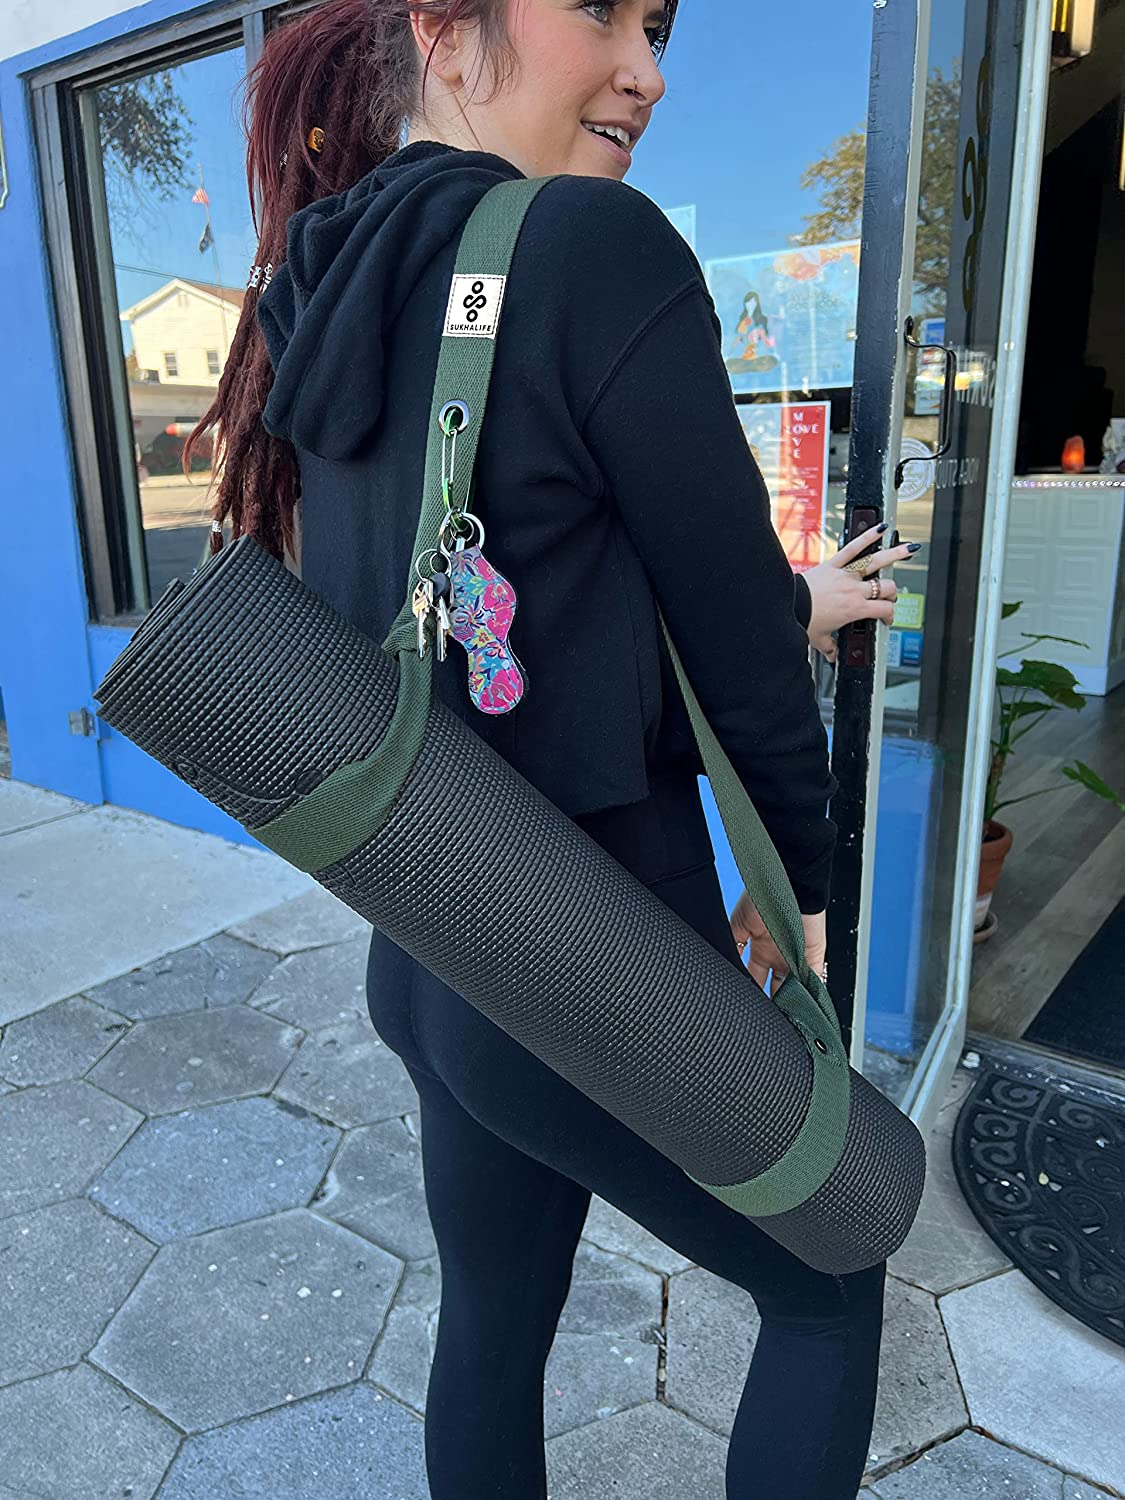 Yoga mat with carrying strap